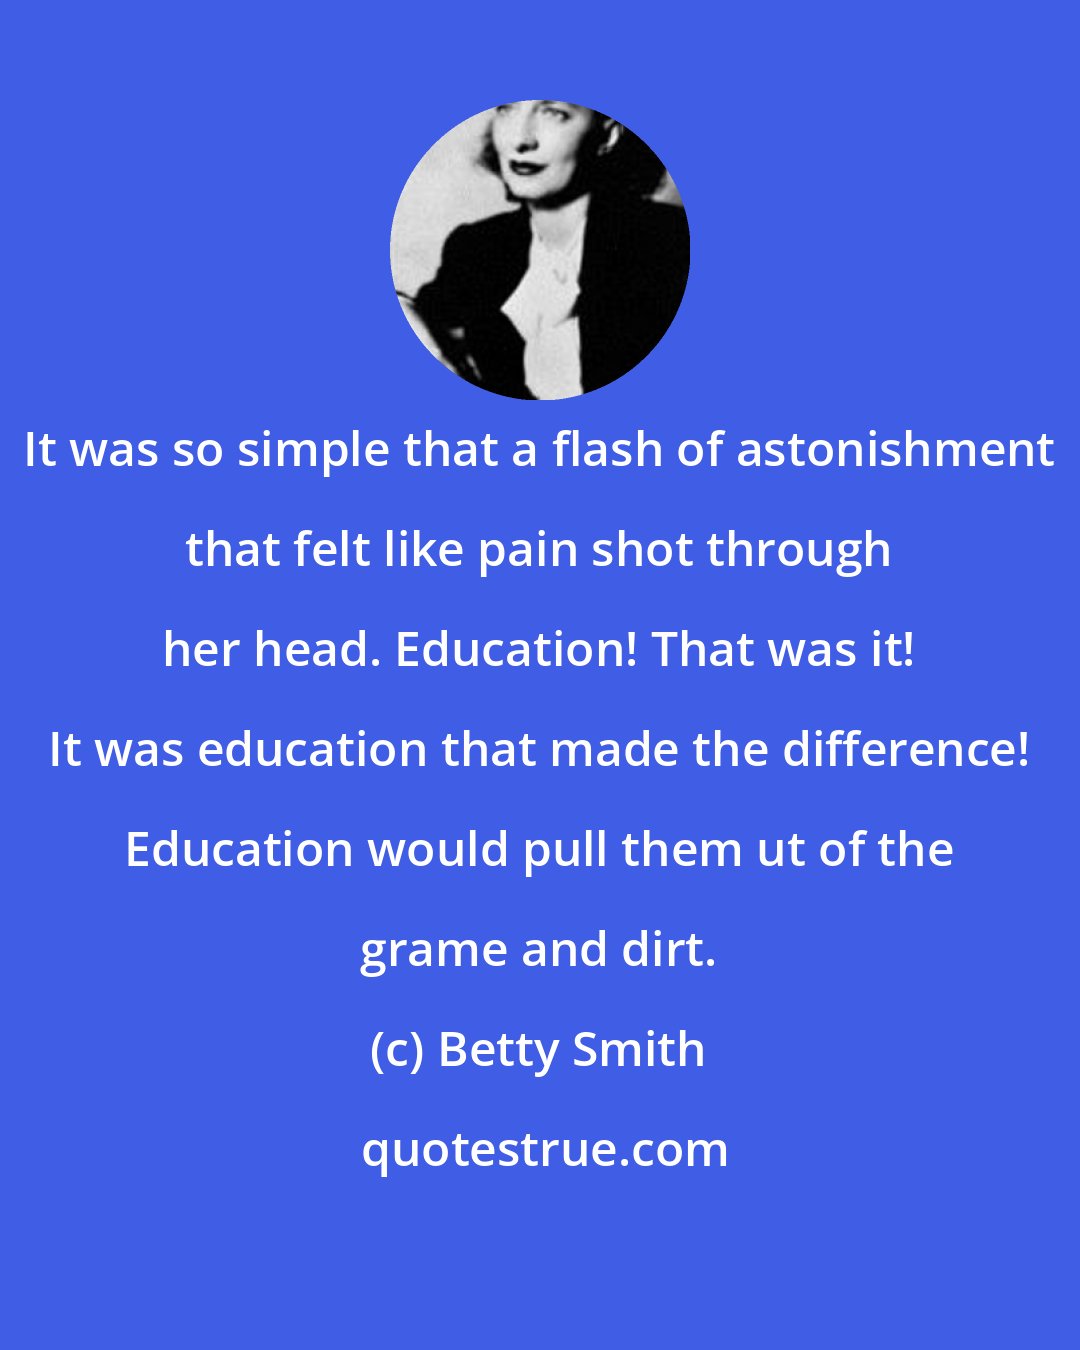 Betty Smith: It was so simple that a flash of astonishment that felt like pain shot through her head. Education! That was it! It was education that made the difference! Education would pull them ut of the grame and dirt.